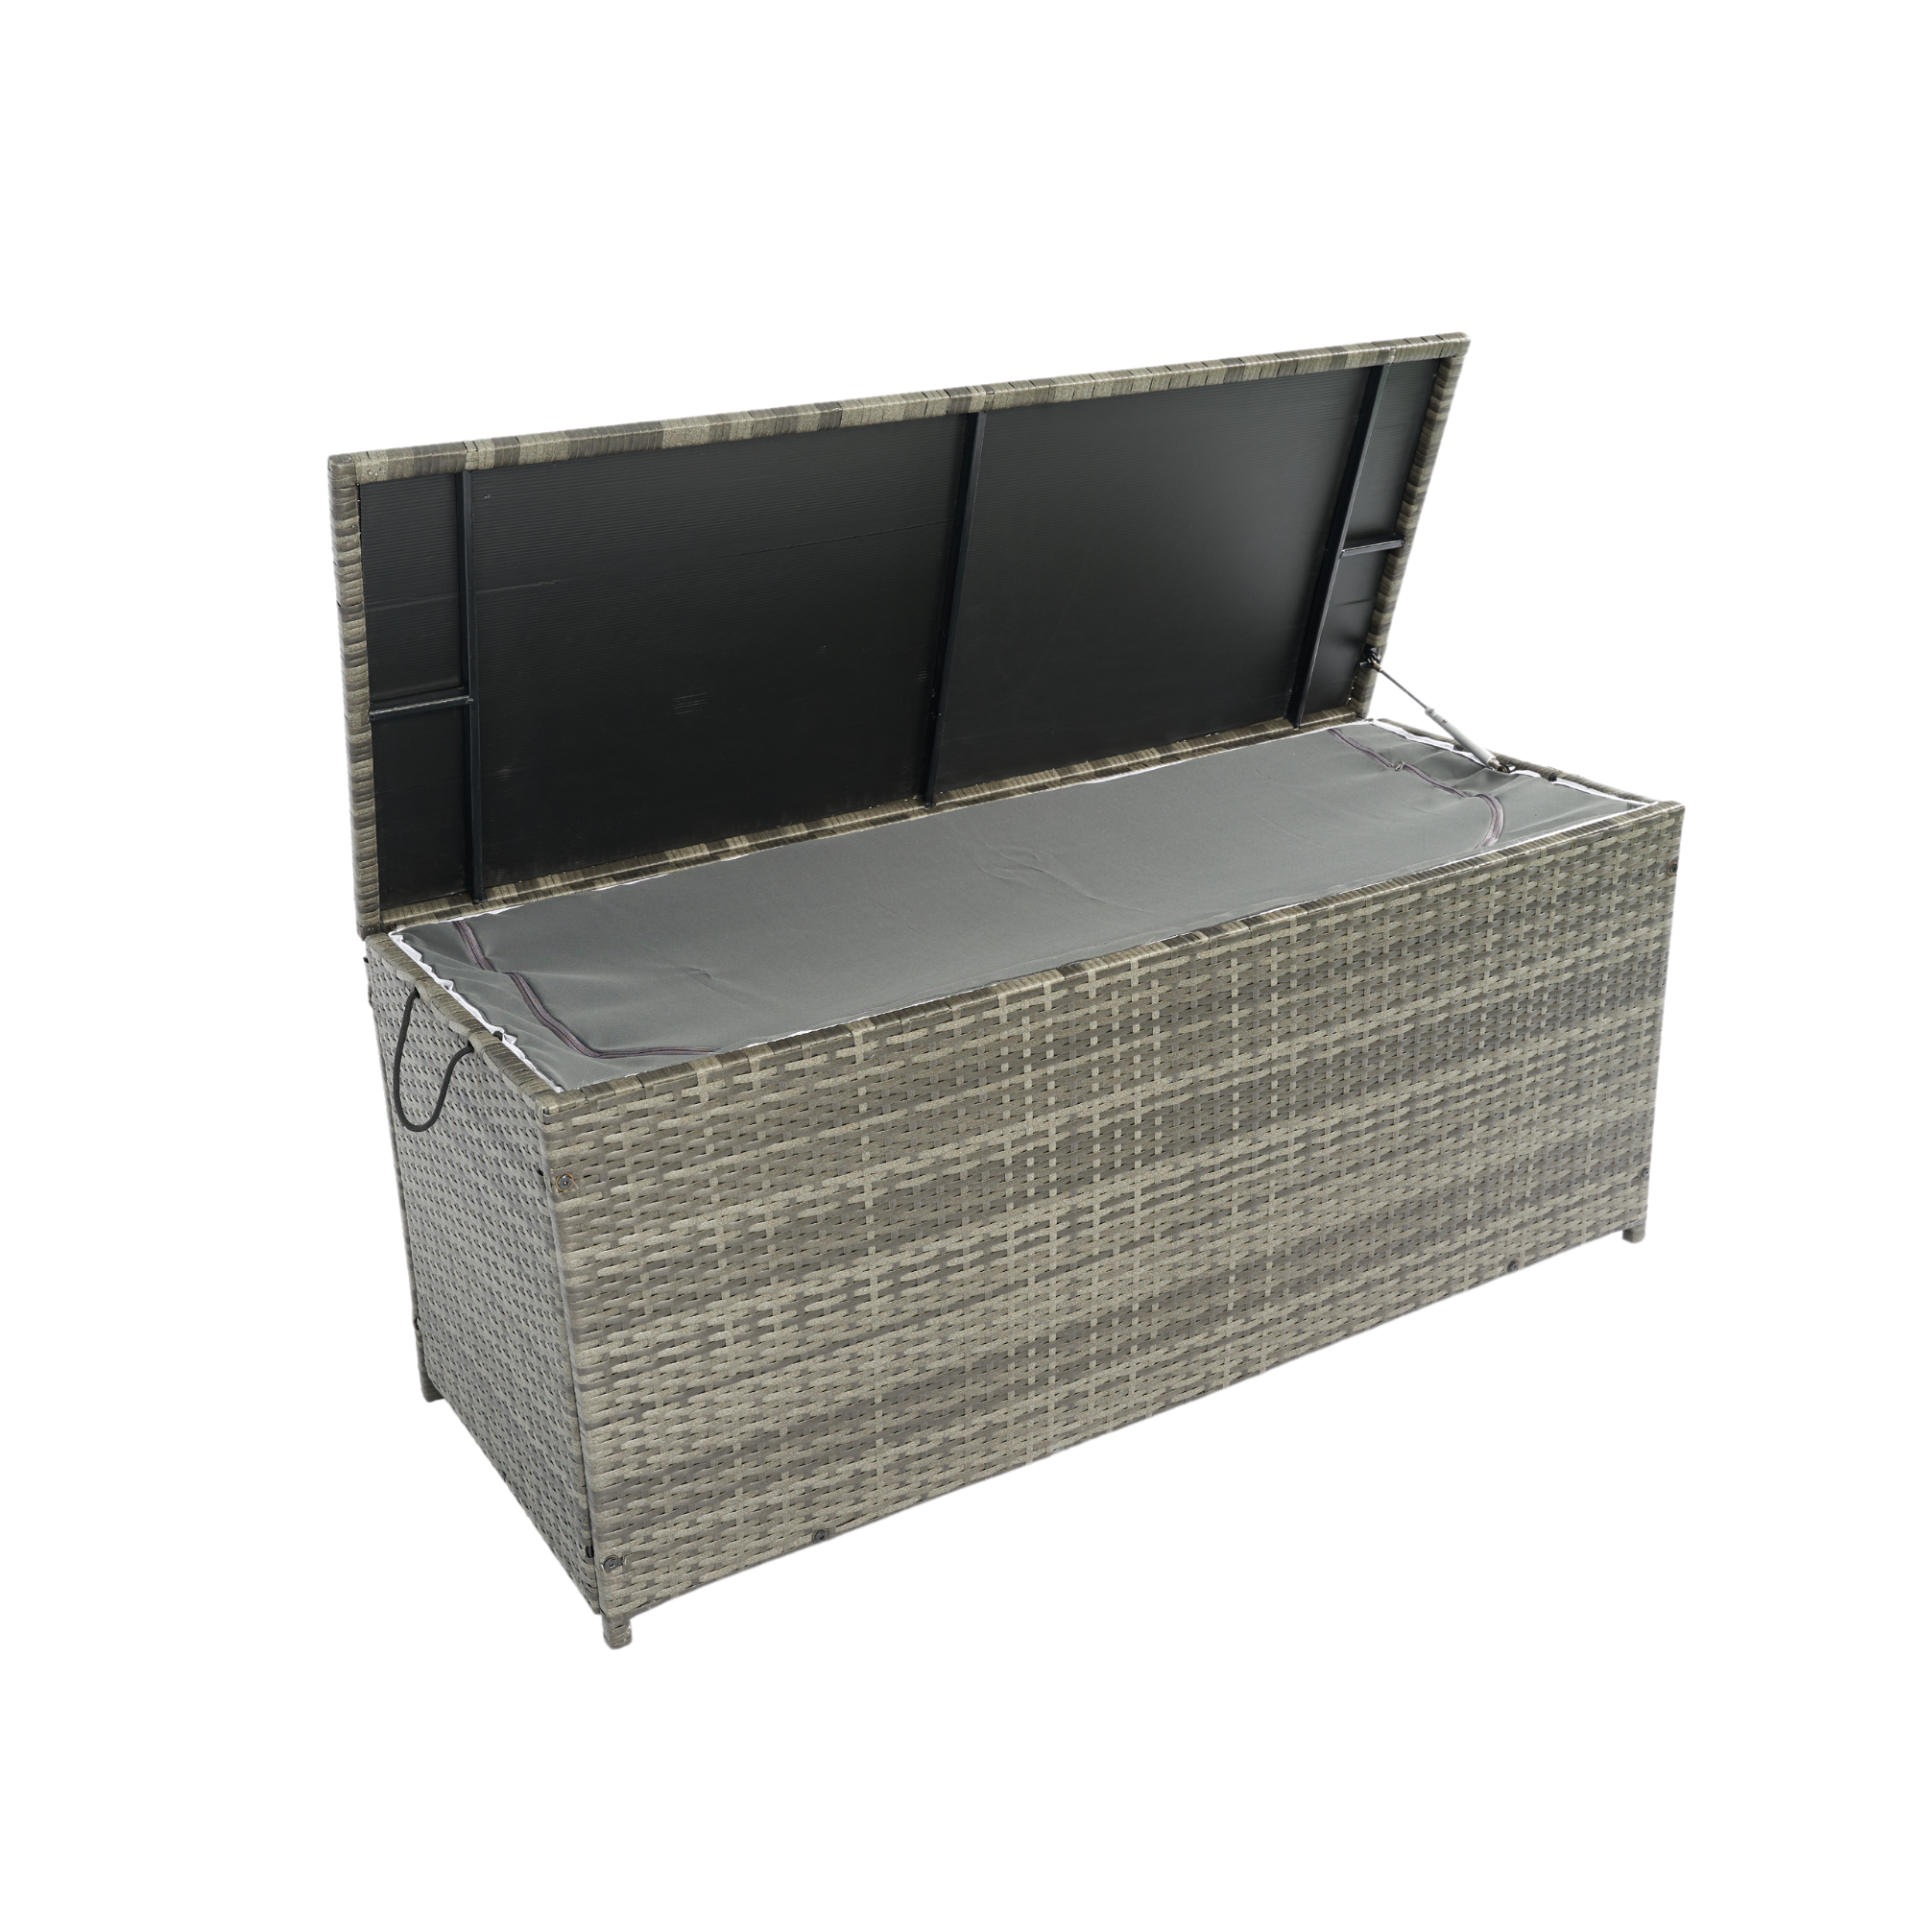 Outdoor Storage Box, 113 Gallon Wicker Patio Deck Boxes with Lid, Outdoor Cushion Storage for Kids Toys, Pillows, Towel Grey Wicker Môdern Space Gallery